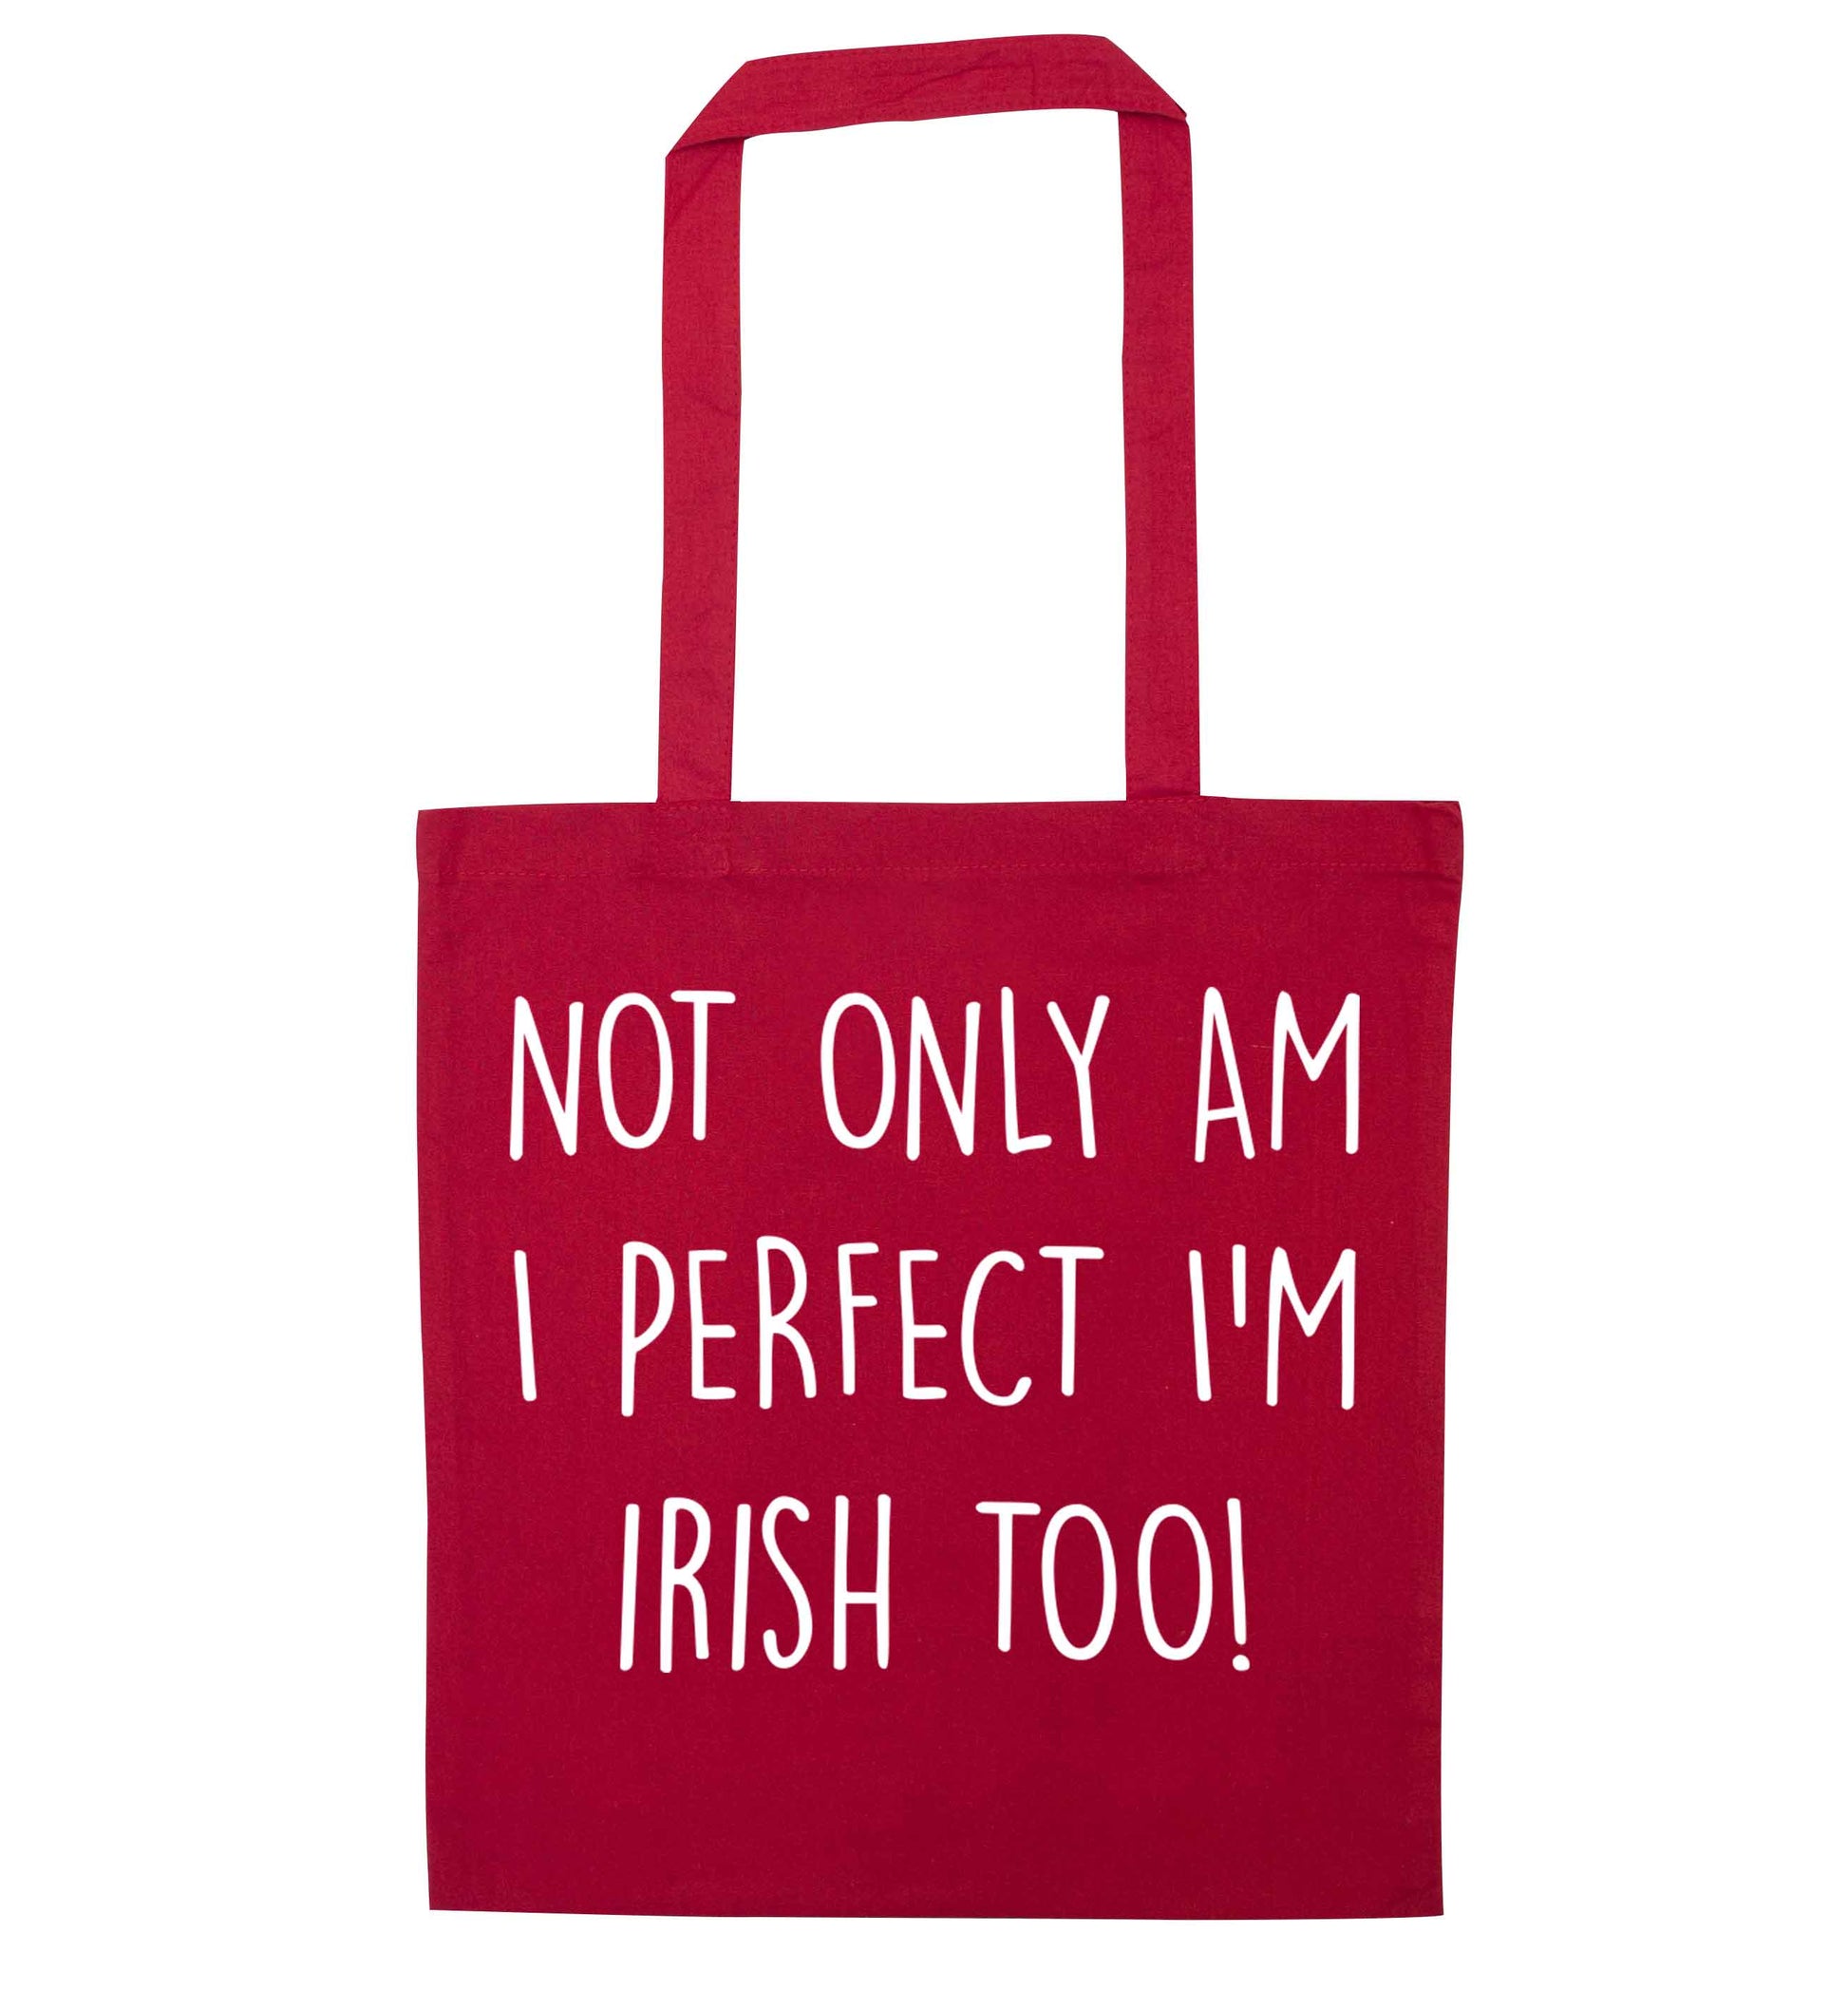 Not only am I perfect I'm Irish too! red tote bag